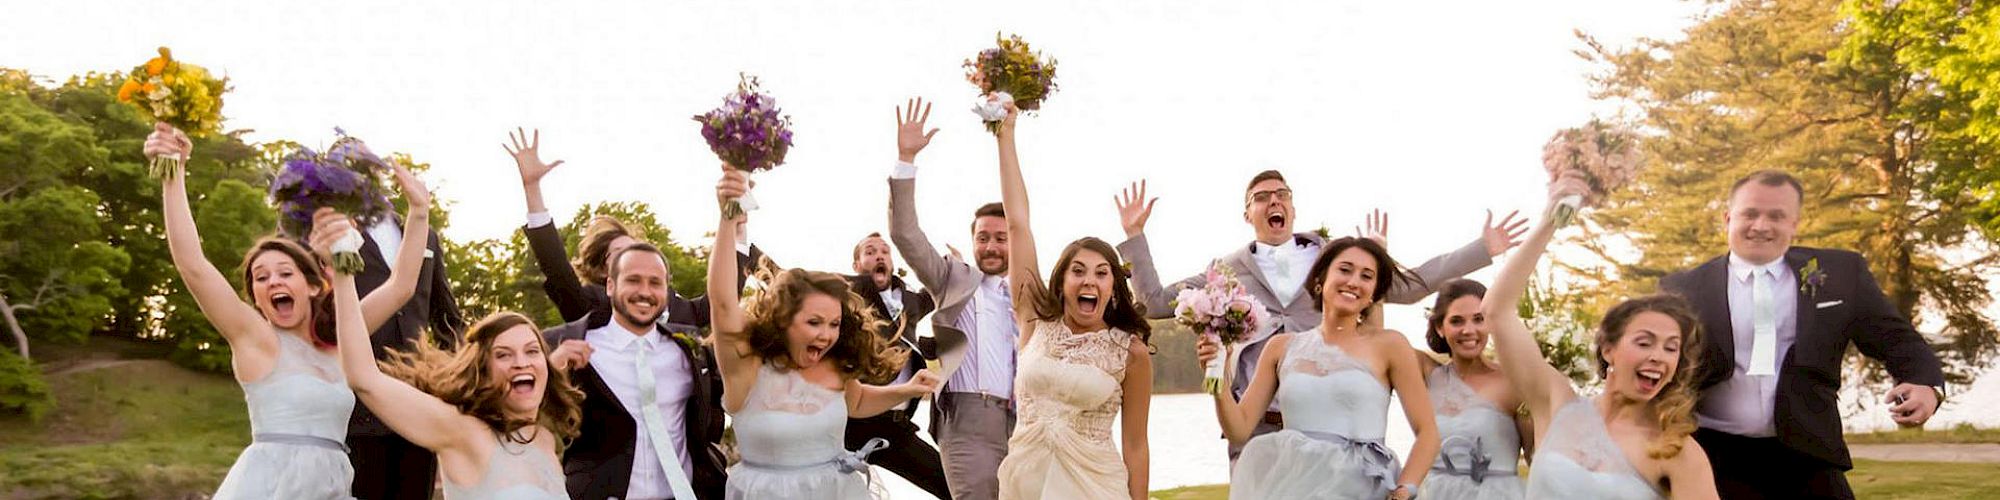 A wedding party is captured mid-jump. The bride, groom, bridesmaids, and groomsmen are joyously celebrating in an outdoor setting, dressed formally.